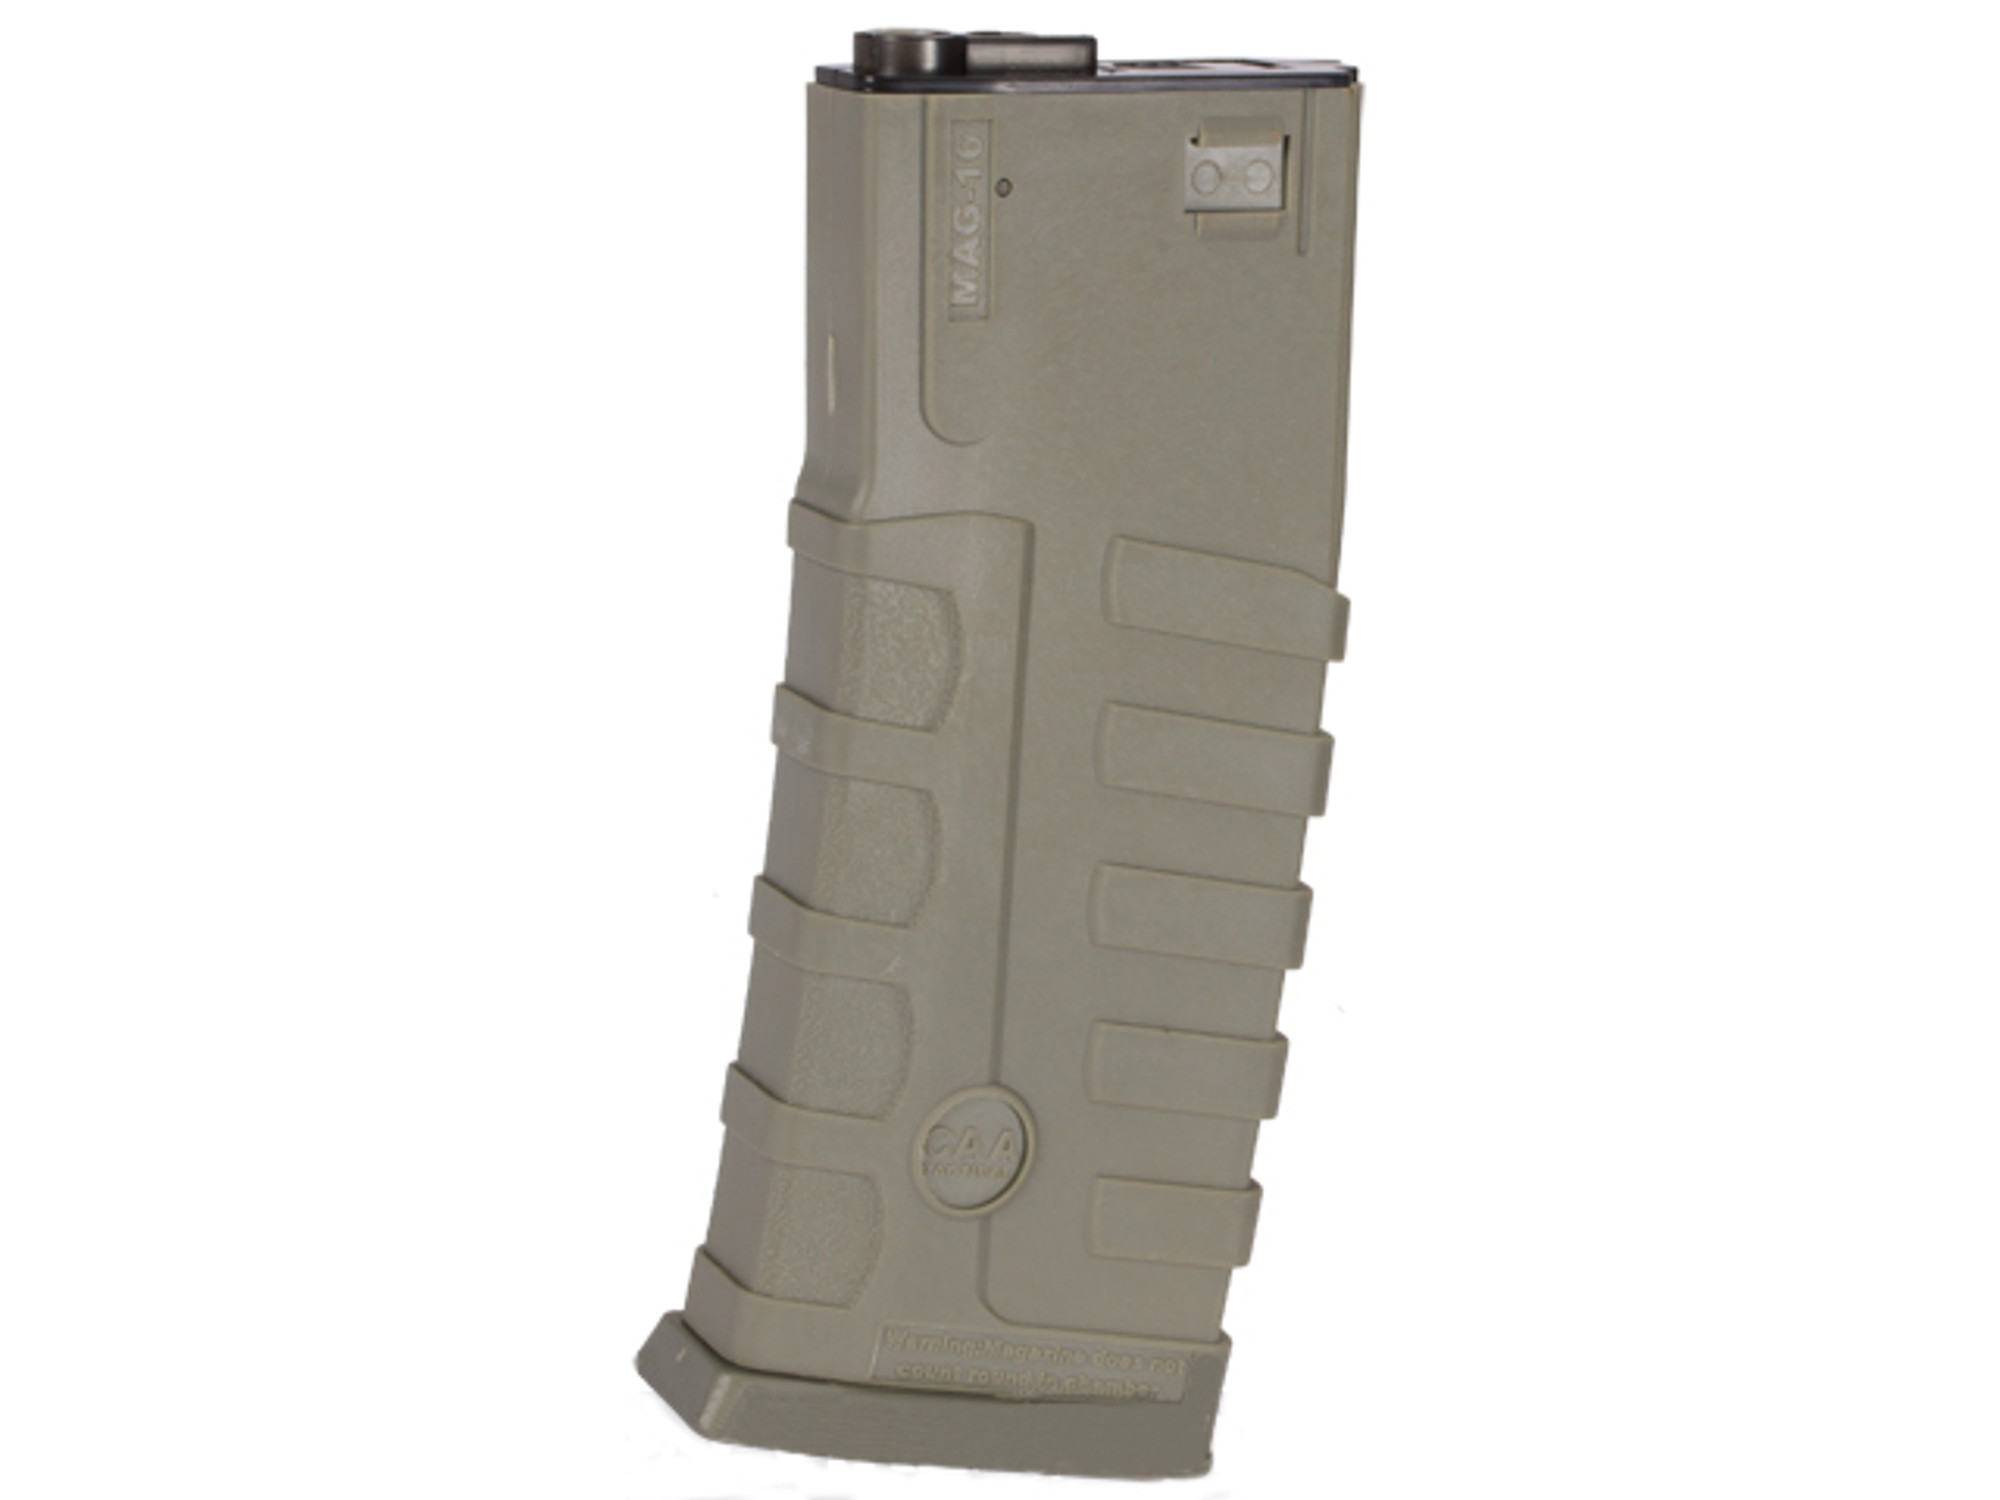 Command Arms CAA Licensed 360rd Magazine for M4 M16 Airsoft AEG by King Arms - Dark Earth